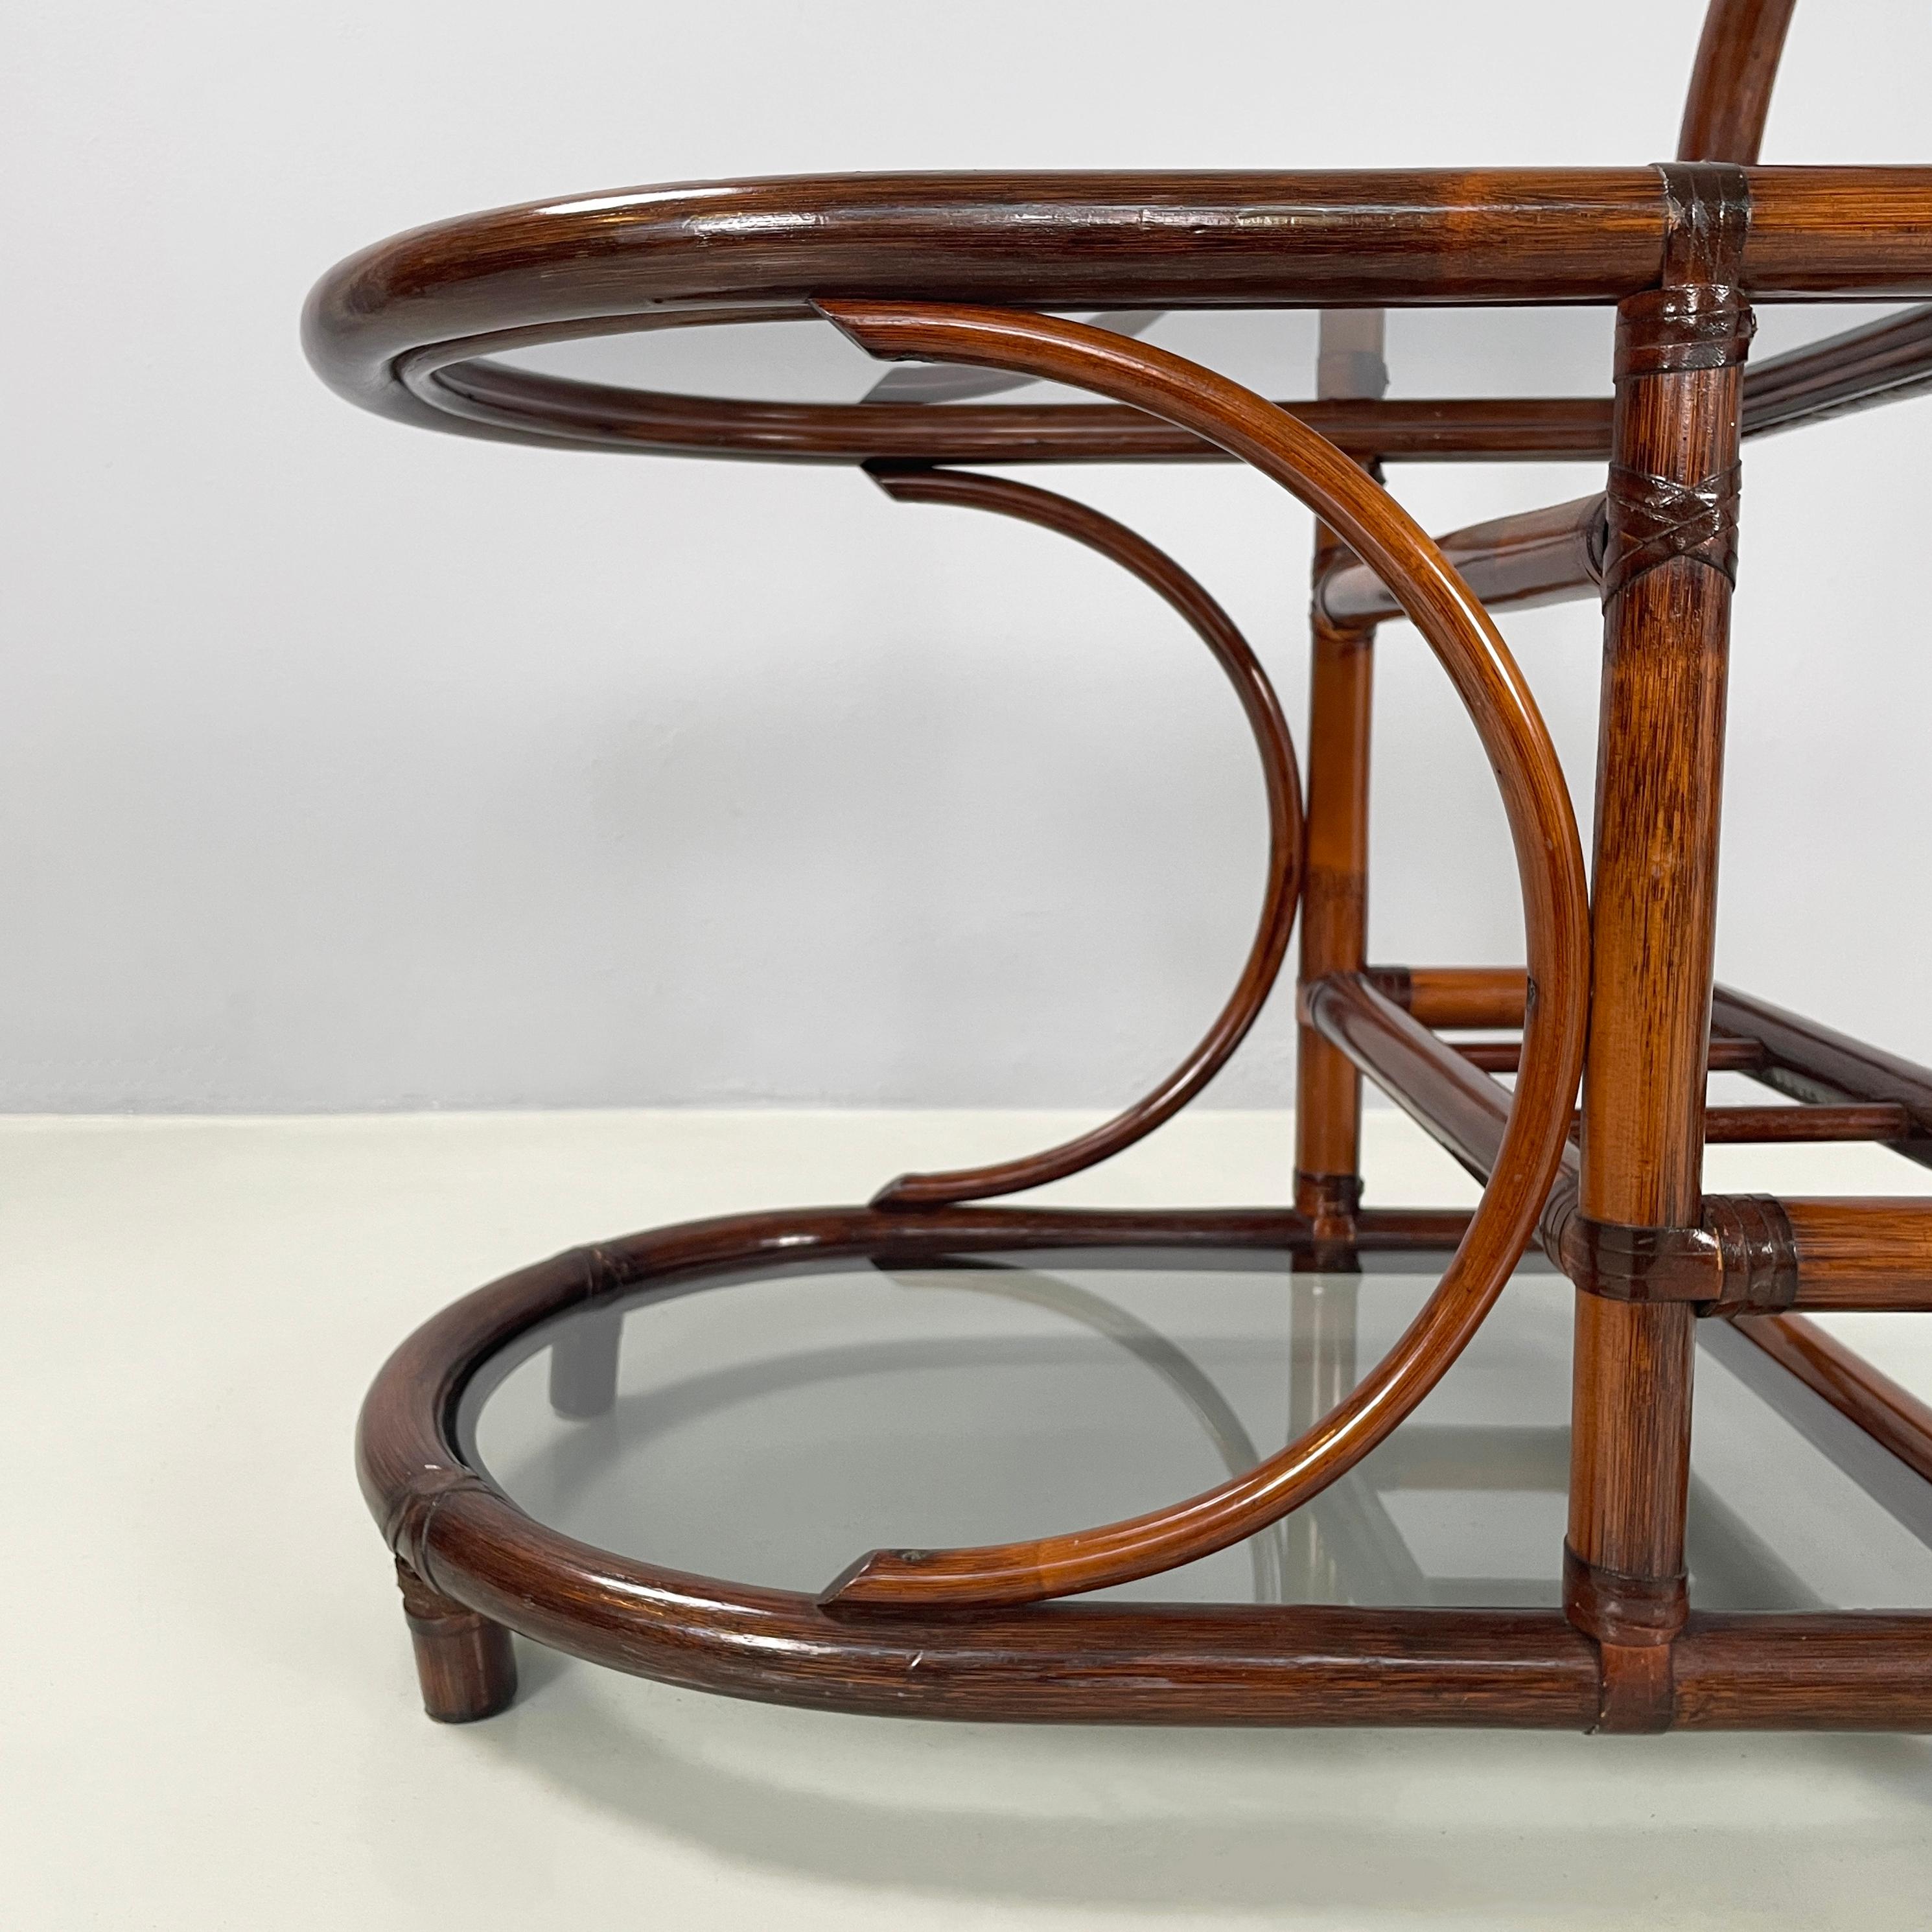 Italian mid-century modern coffee table in smoked glass and dark bamboo, 1960s For Sale 4